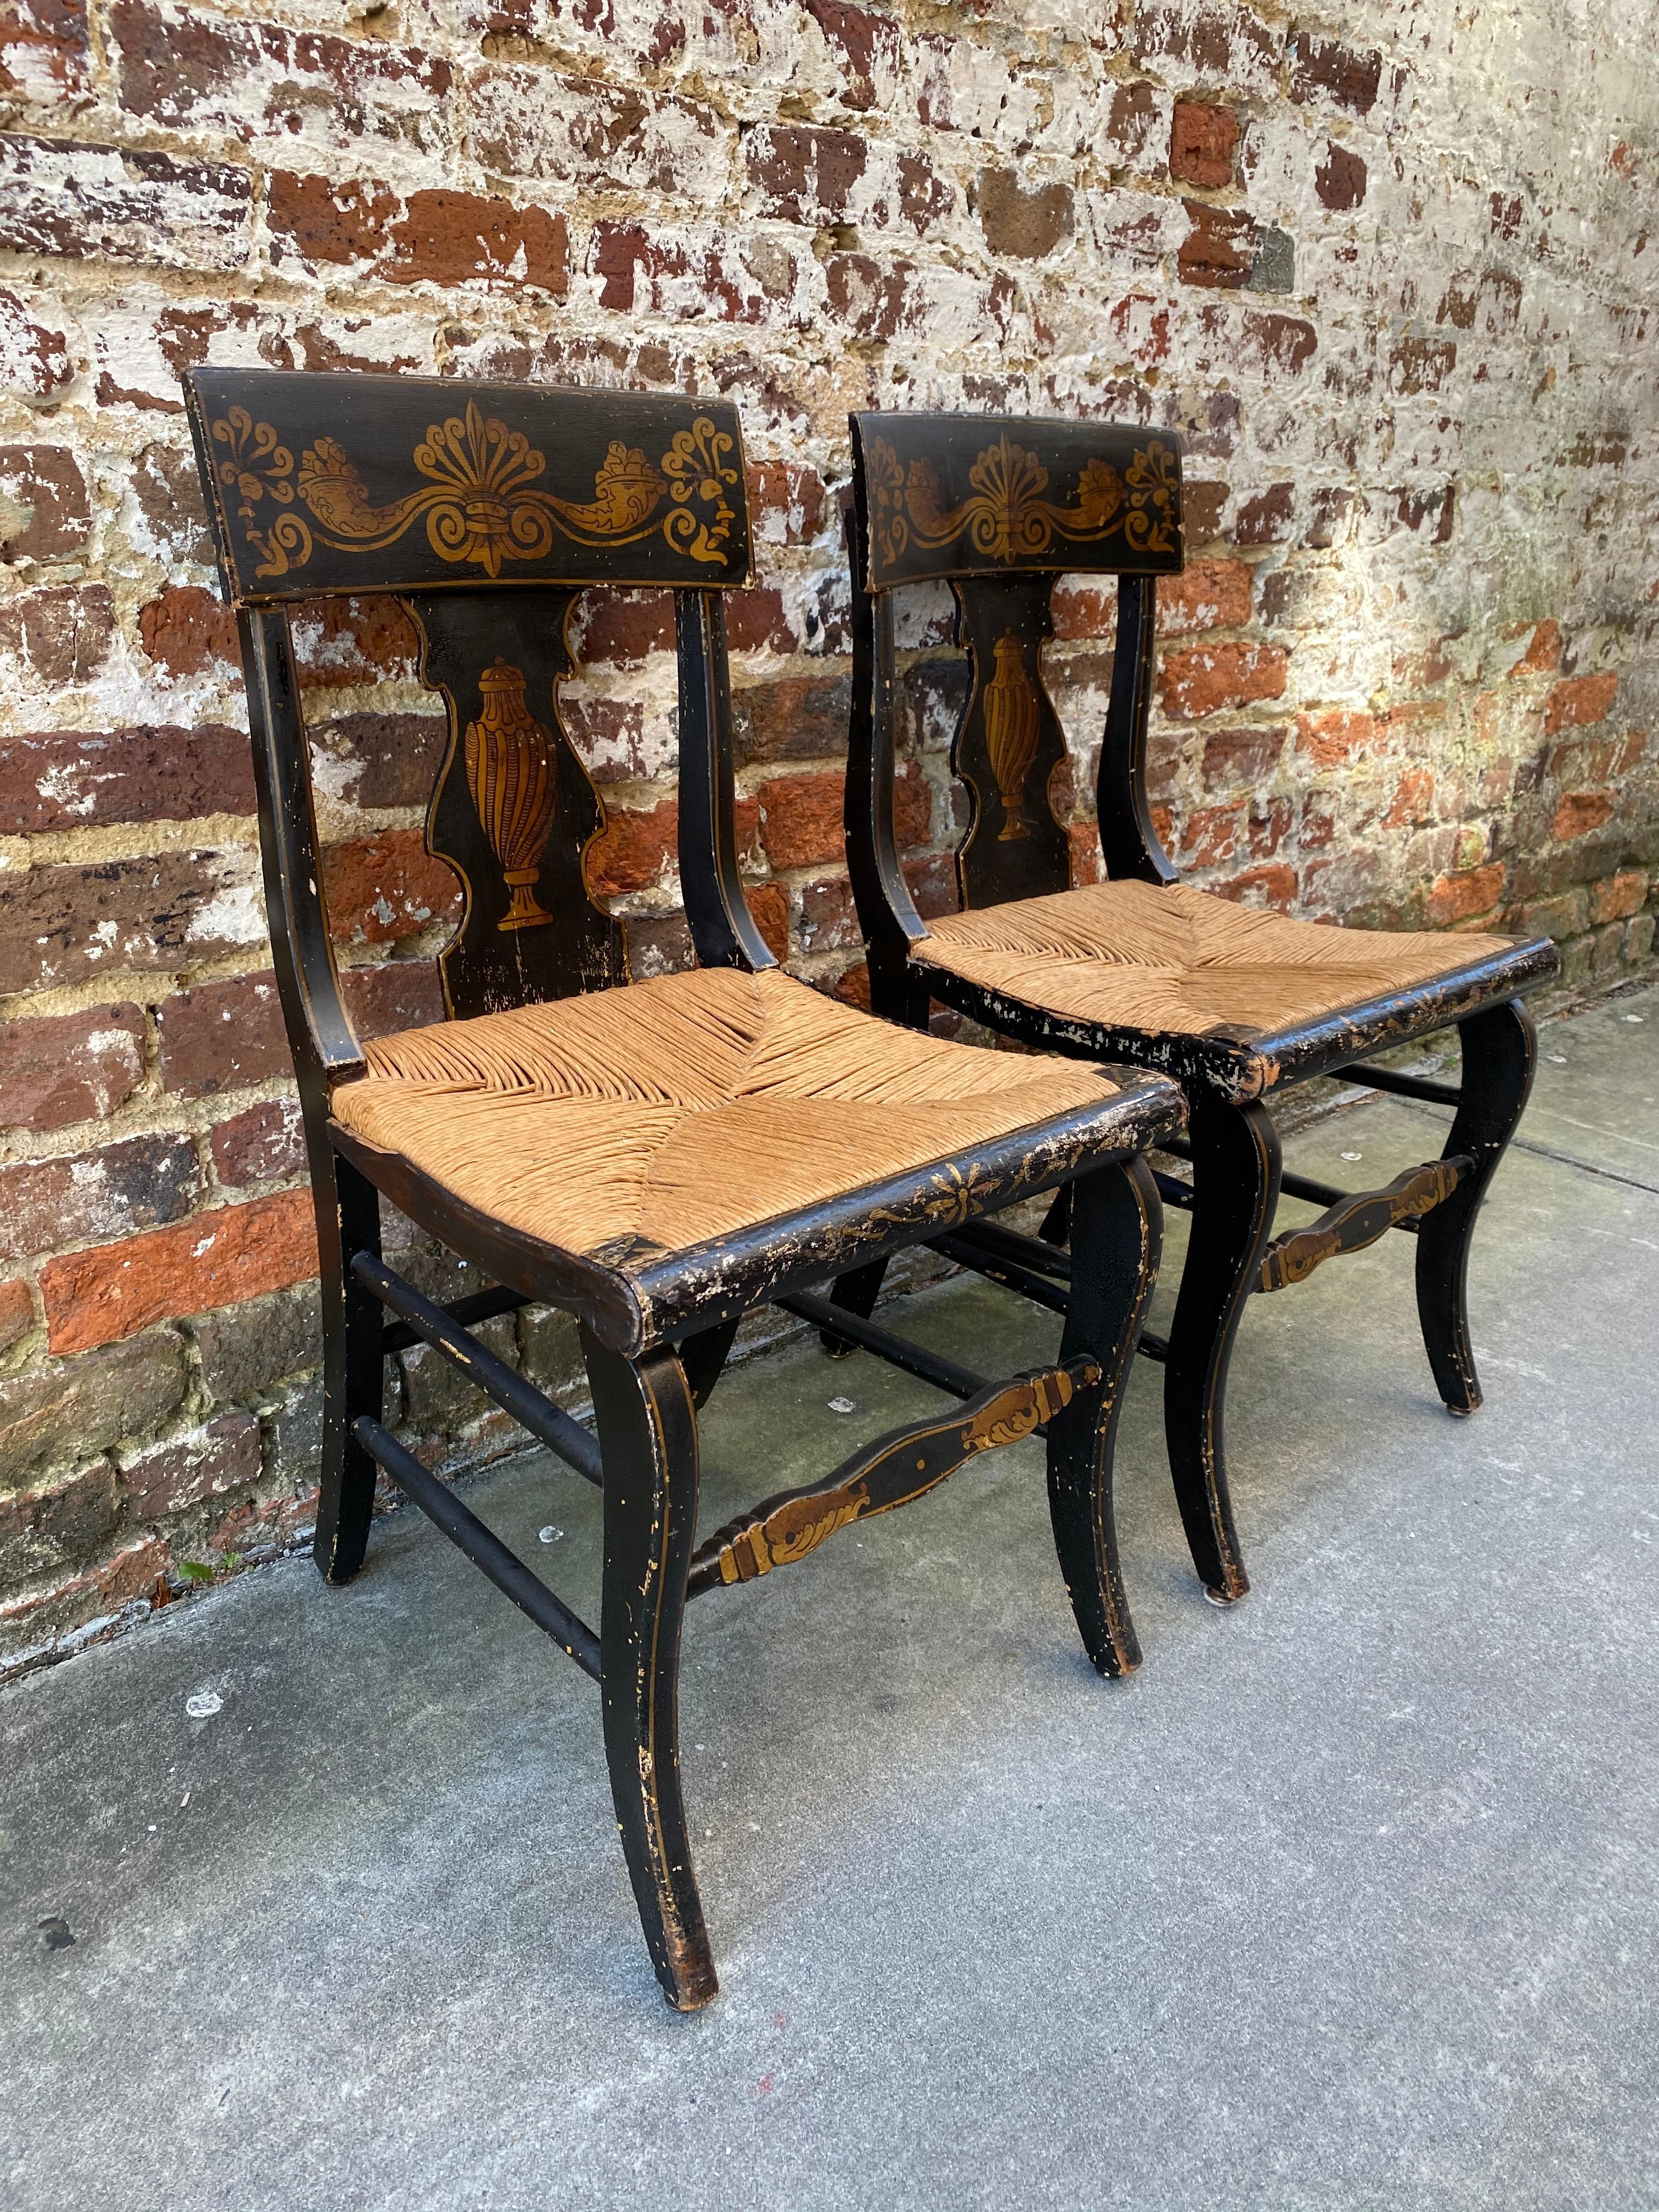 set of 6 painted saber leg chairs with rush bottom seats. 19th century black painted with gold stenciled paint.